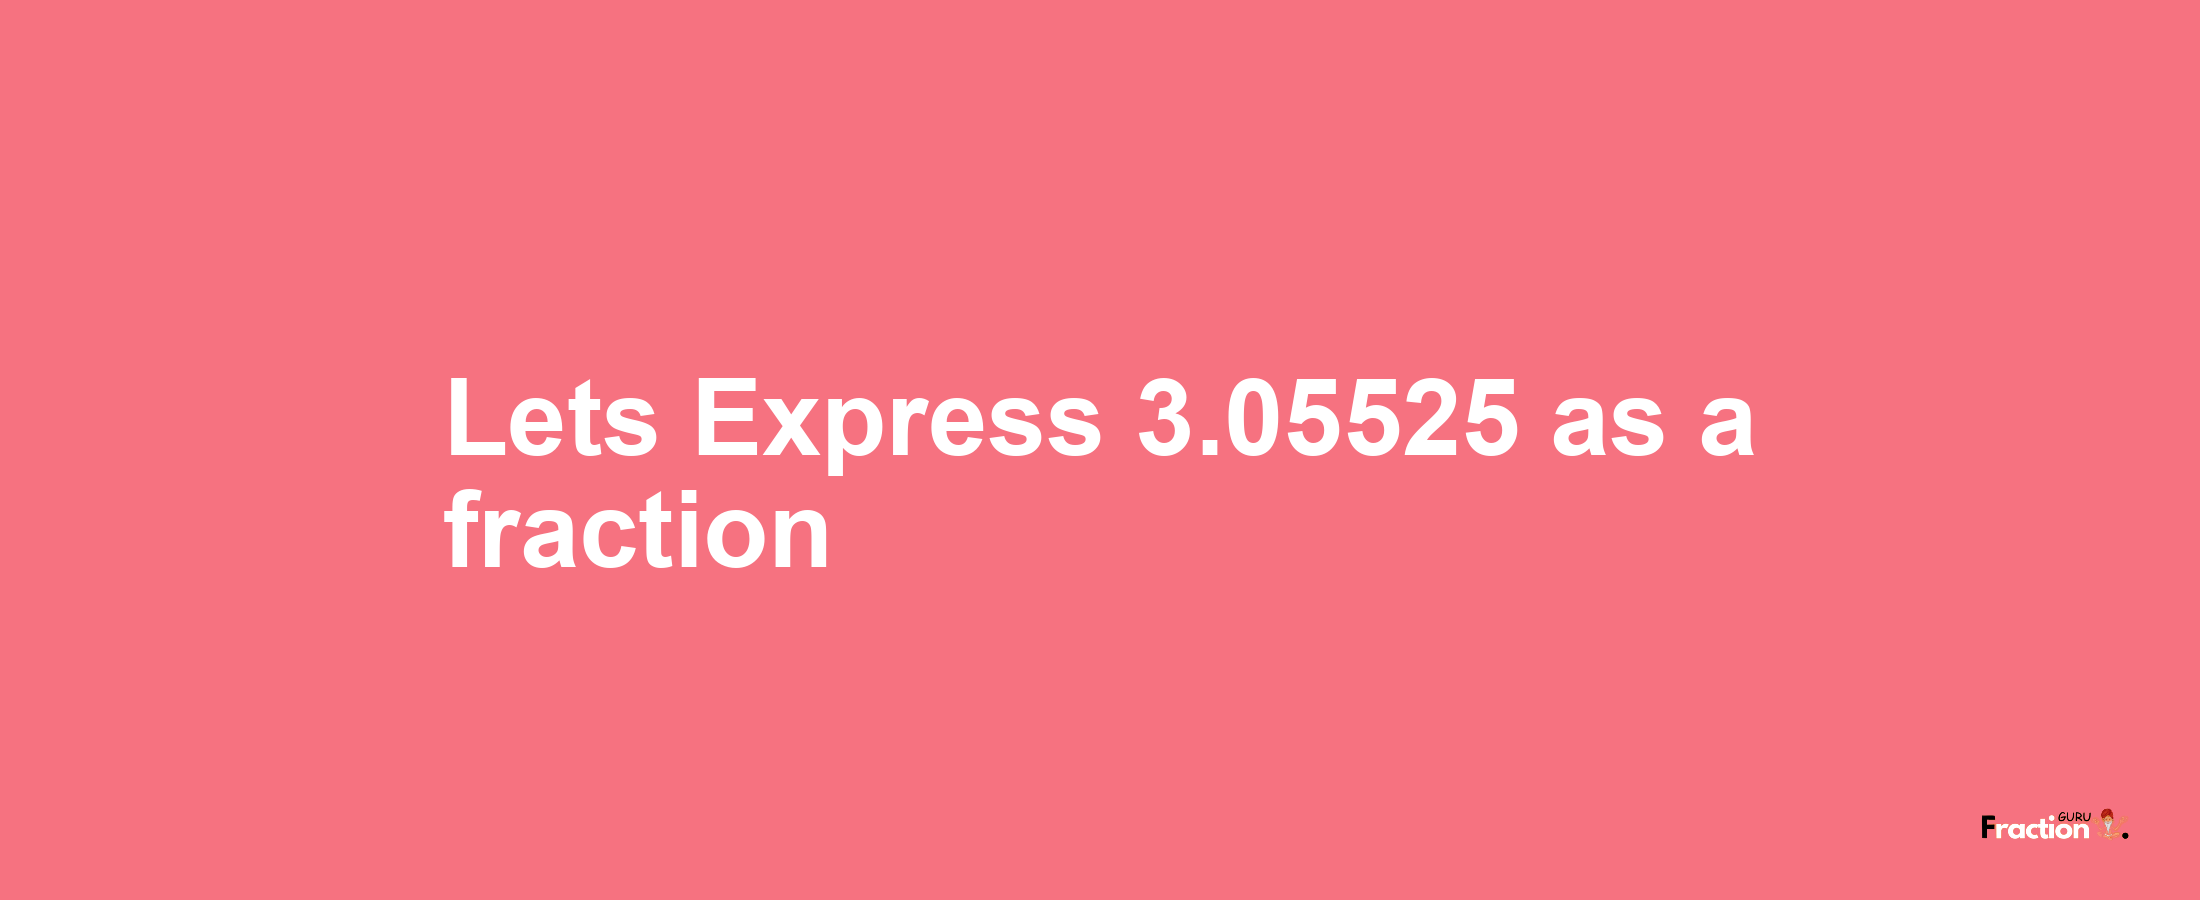 Lets Express 3.05525 as afraction